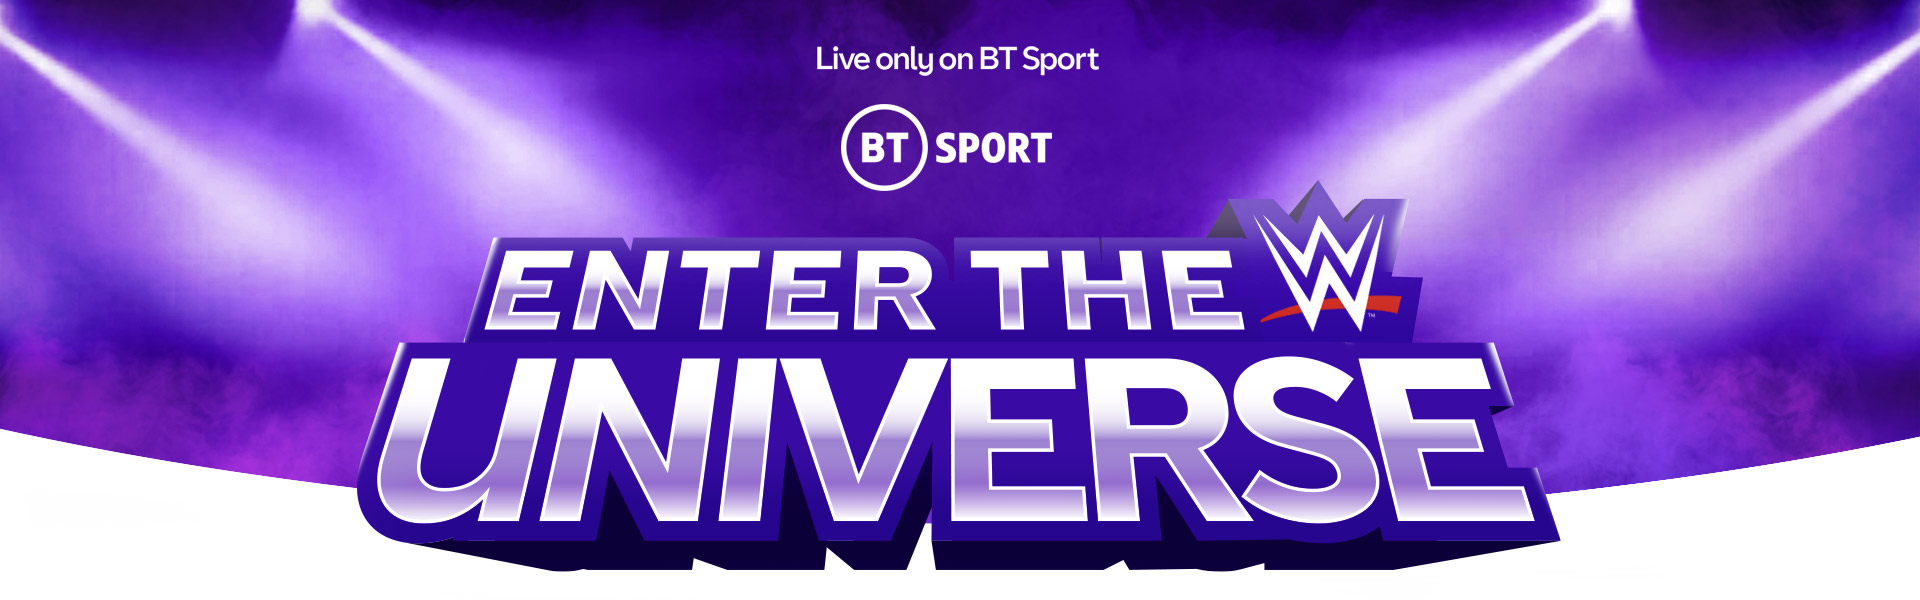 WWE moves to BT Sport